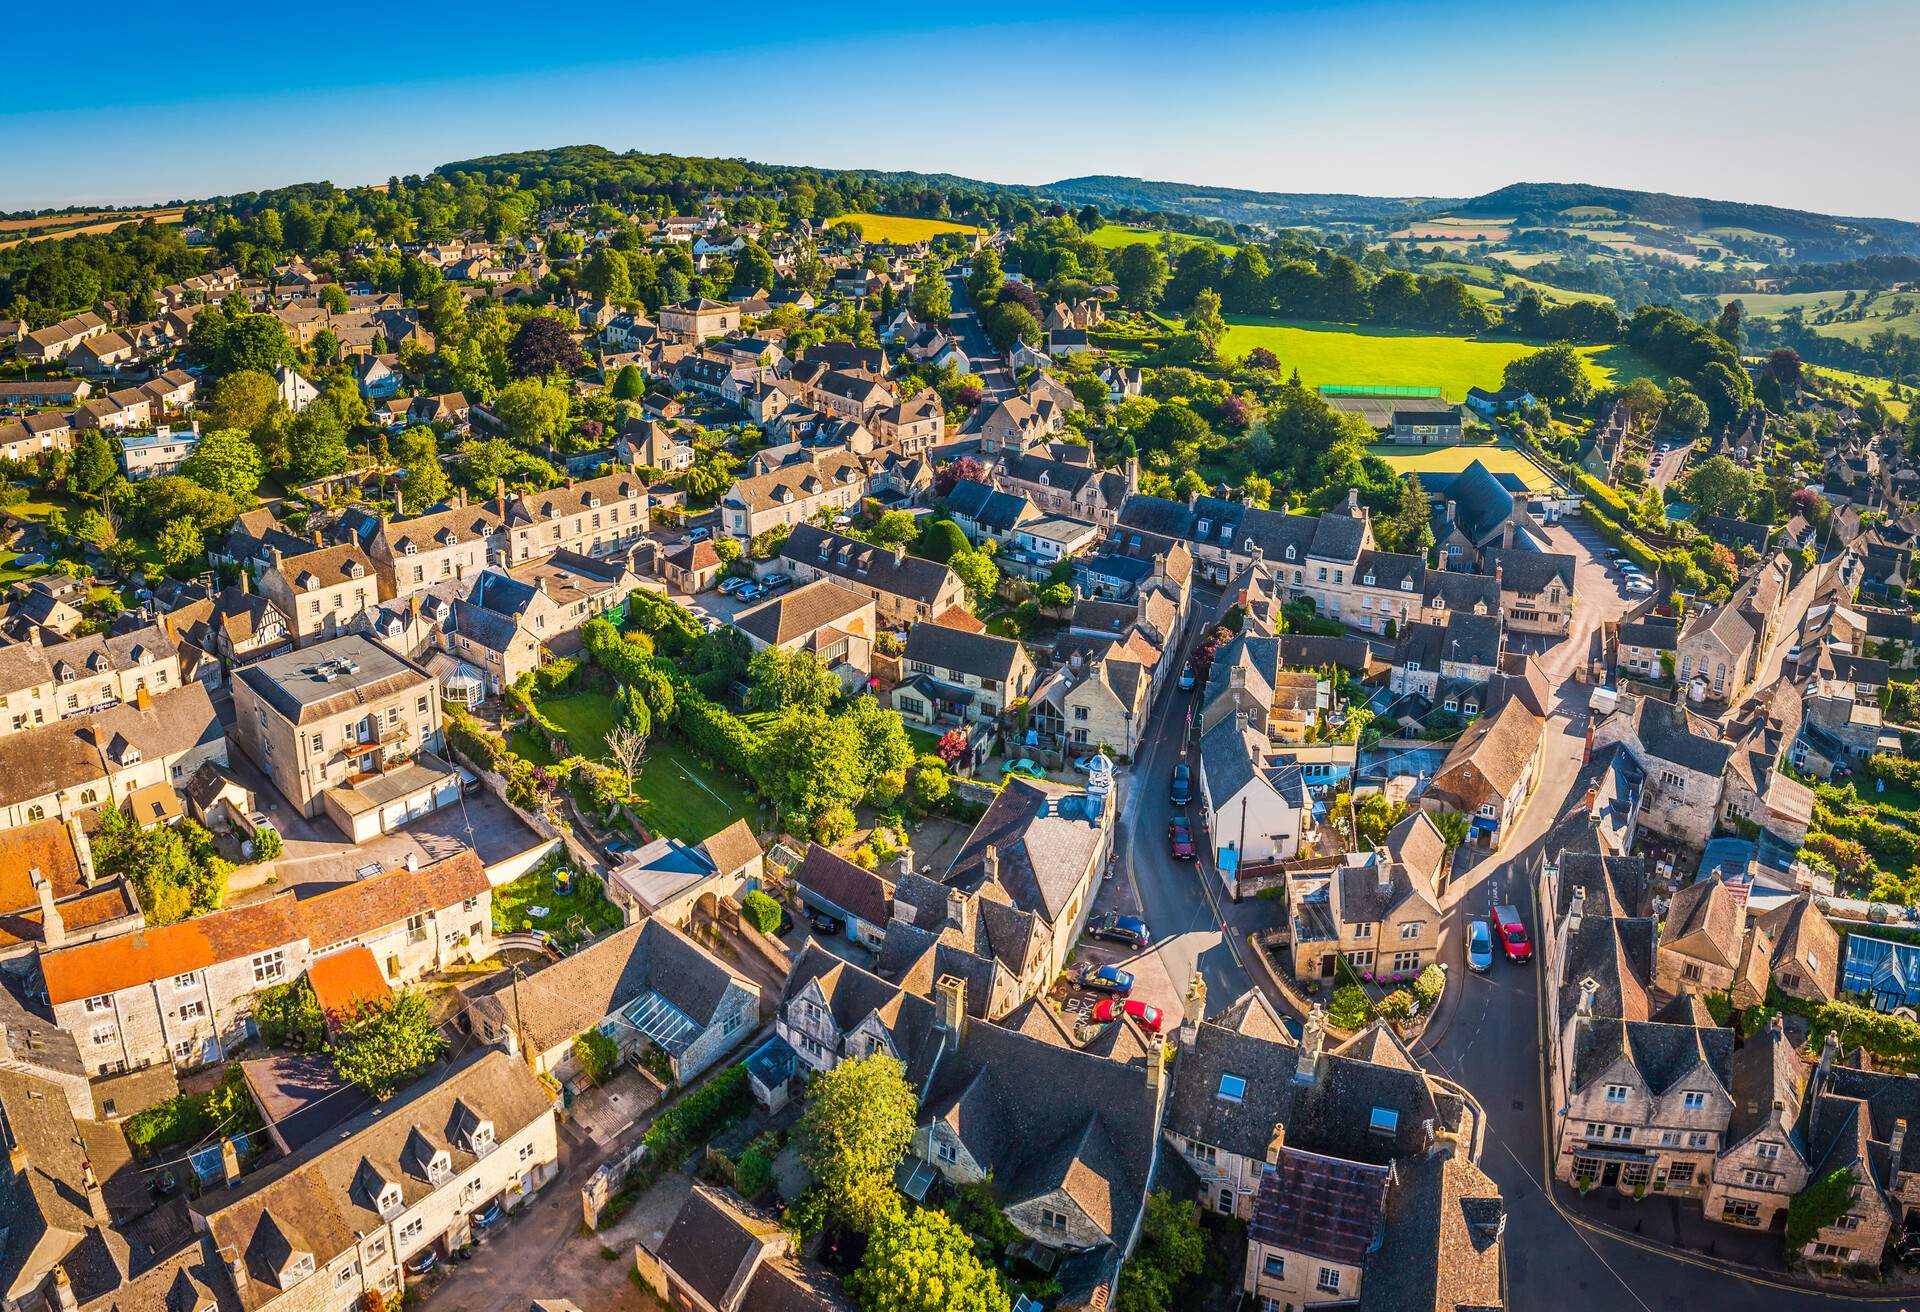 Aerial view over the iconic Cotswold village of Painswick, with its honey coloured limestone cottages deep in the bucolic countryside of Gloucestershire, UK, framed by vibrant green patchwork fields and clear blue summer skies. ProPhoto RGB profile for maximum color fidelity and gamut.